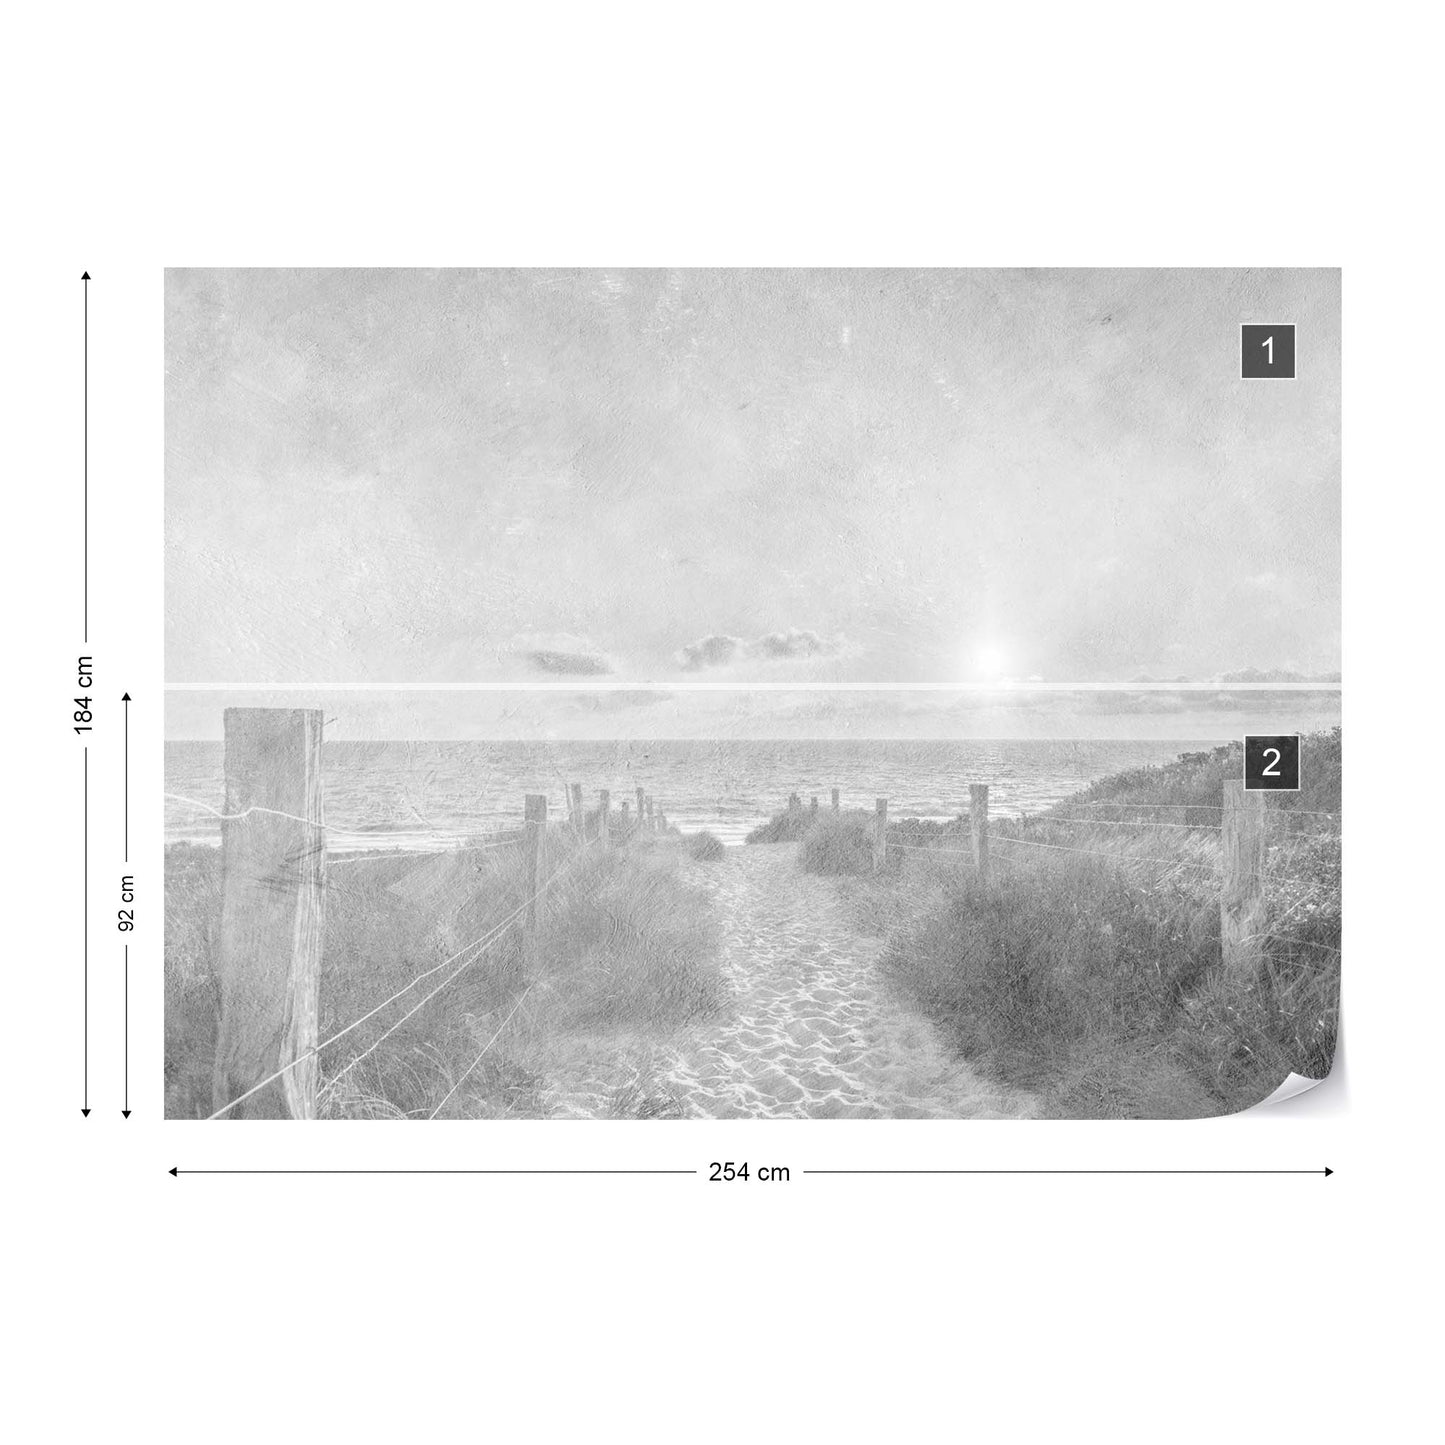 Summer Sunset Faded Vintage Black and White Wallpaper Waterproof for Rooms Bathroom Kitchen - USTAD HOME